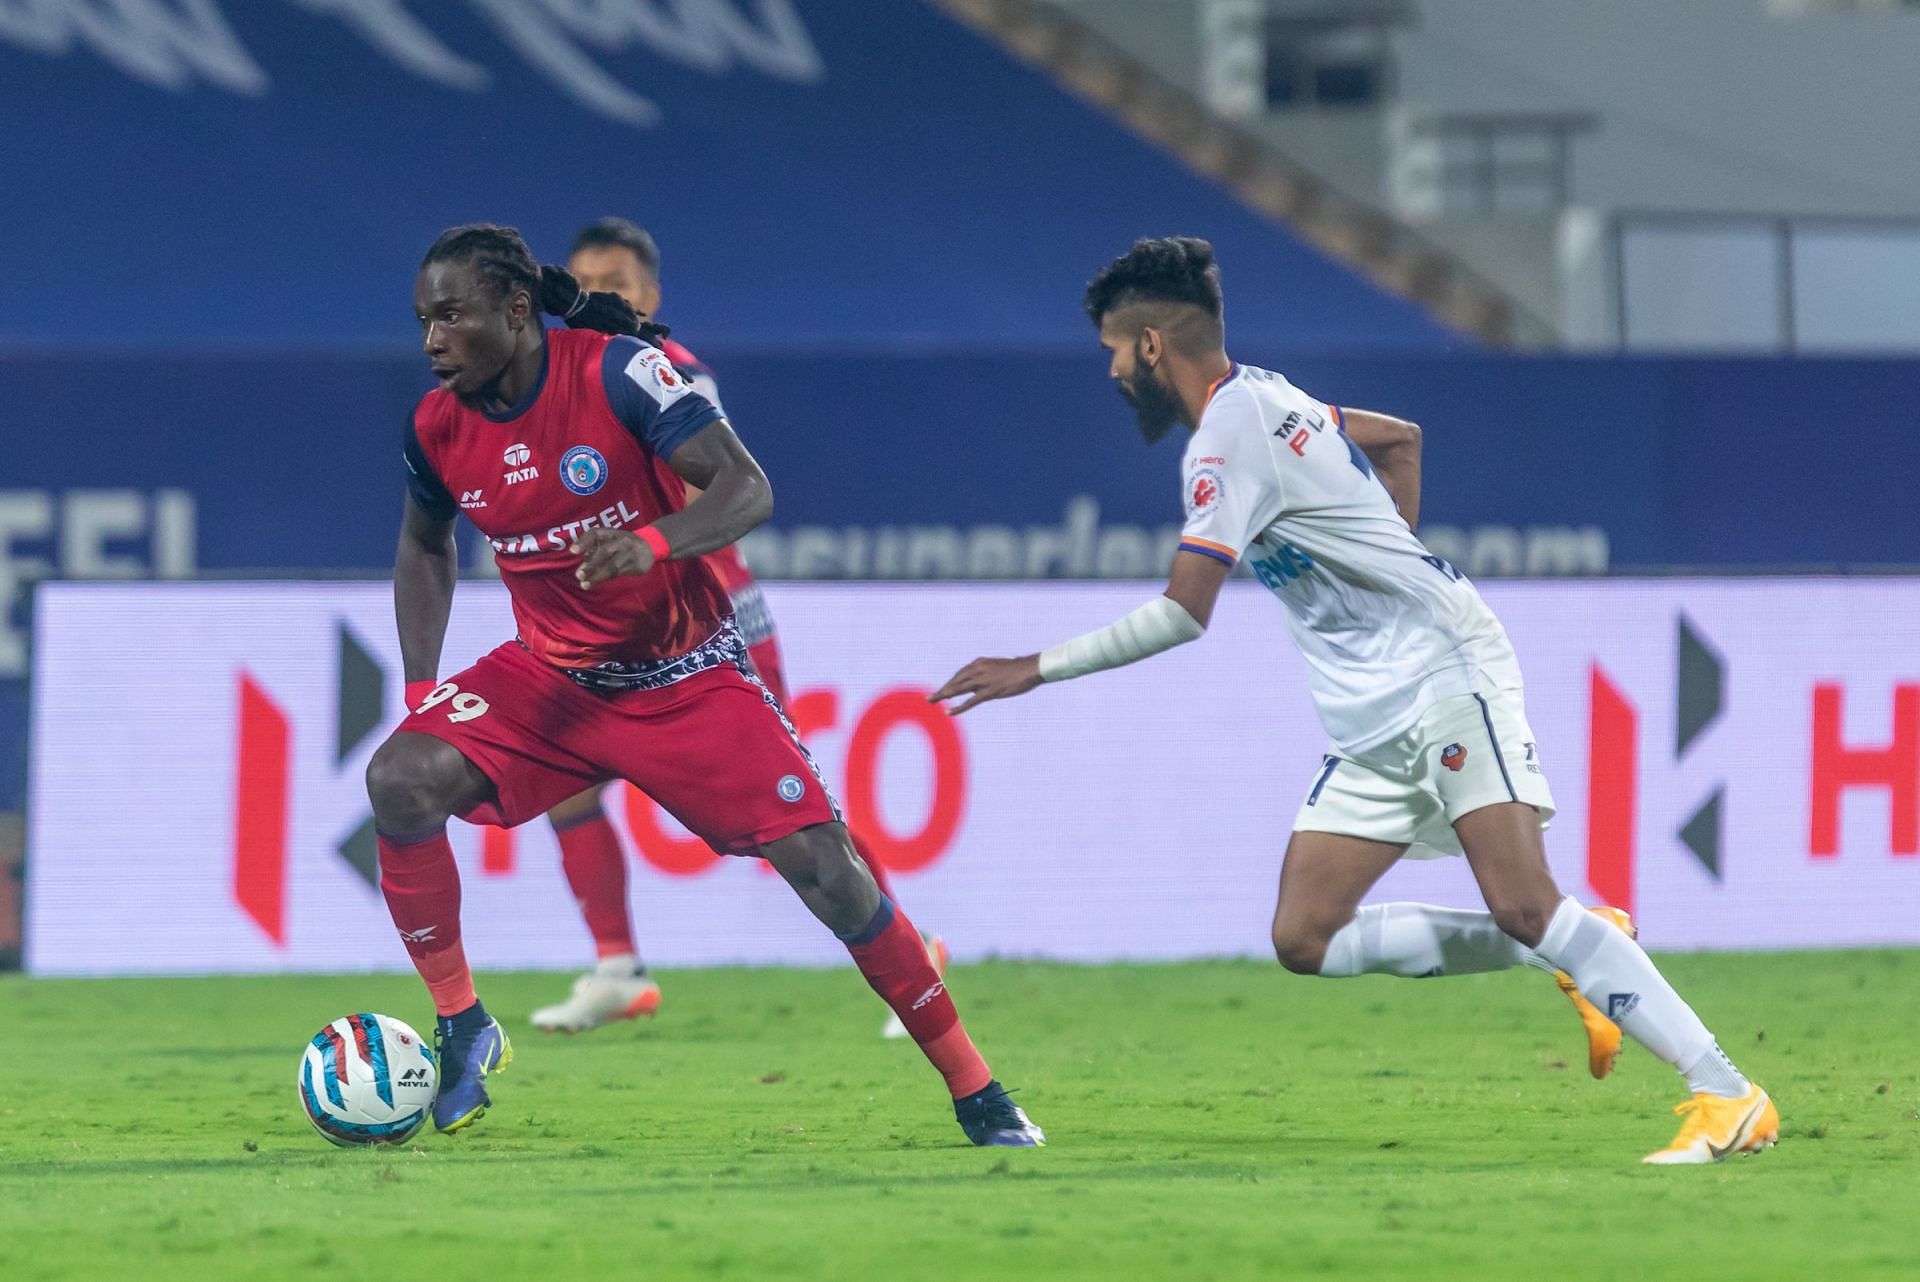 Daniel Chima Chukwu made a significant impact for the Men of Steel during the 2021-22 ISL campaign (Image Courtesy: ISL).